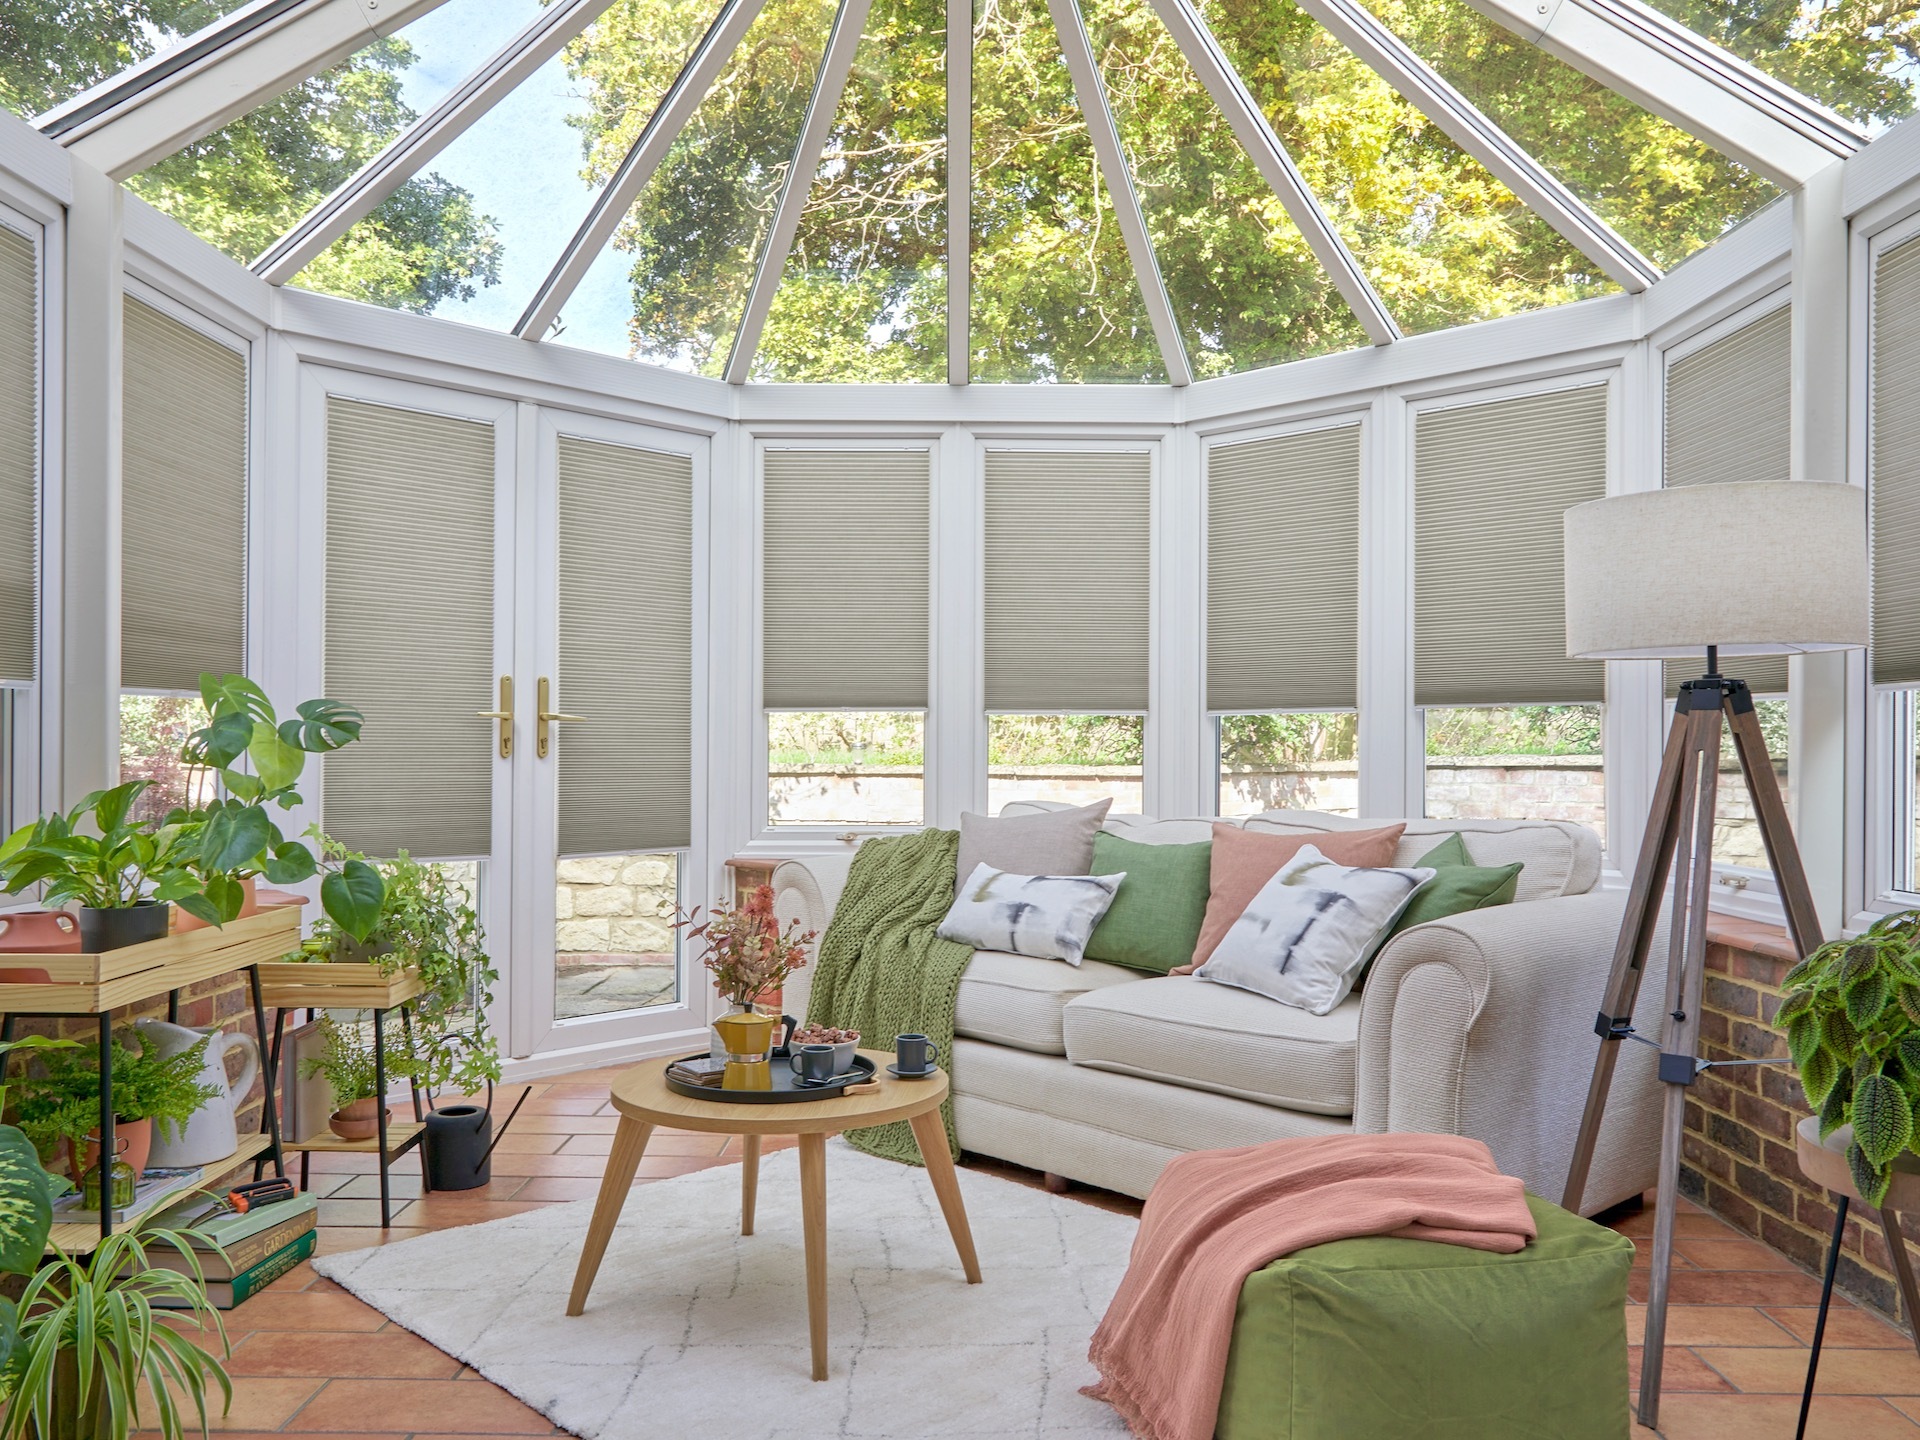 Rotunda conservatory with Duette blinds by Hillarys